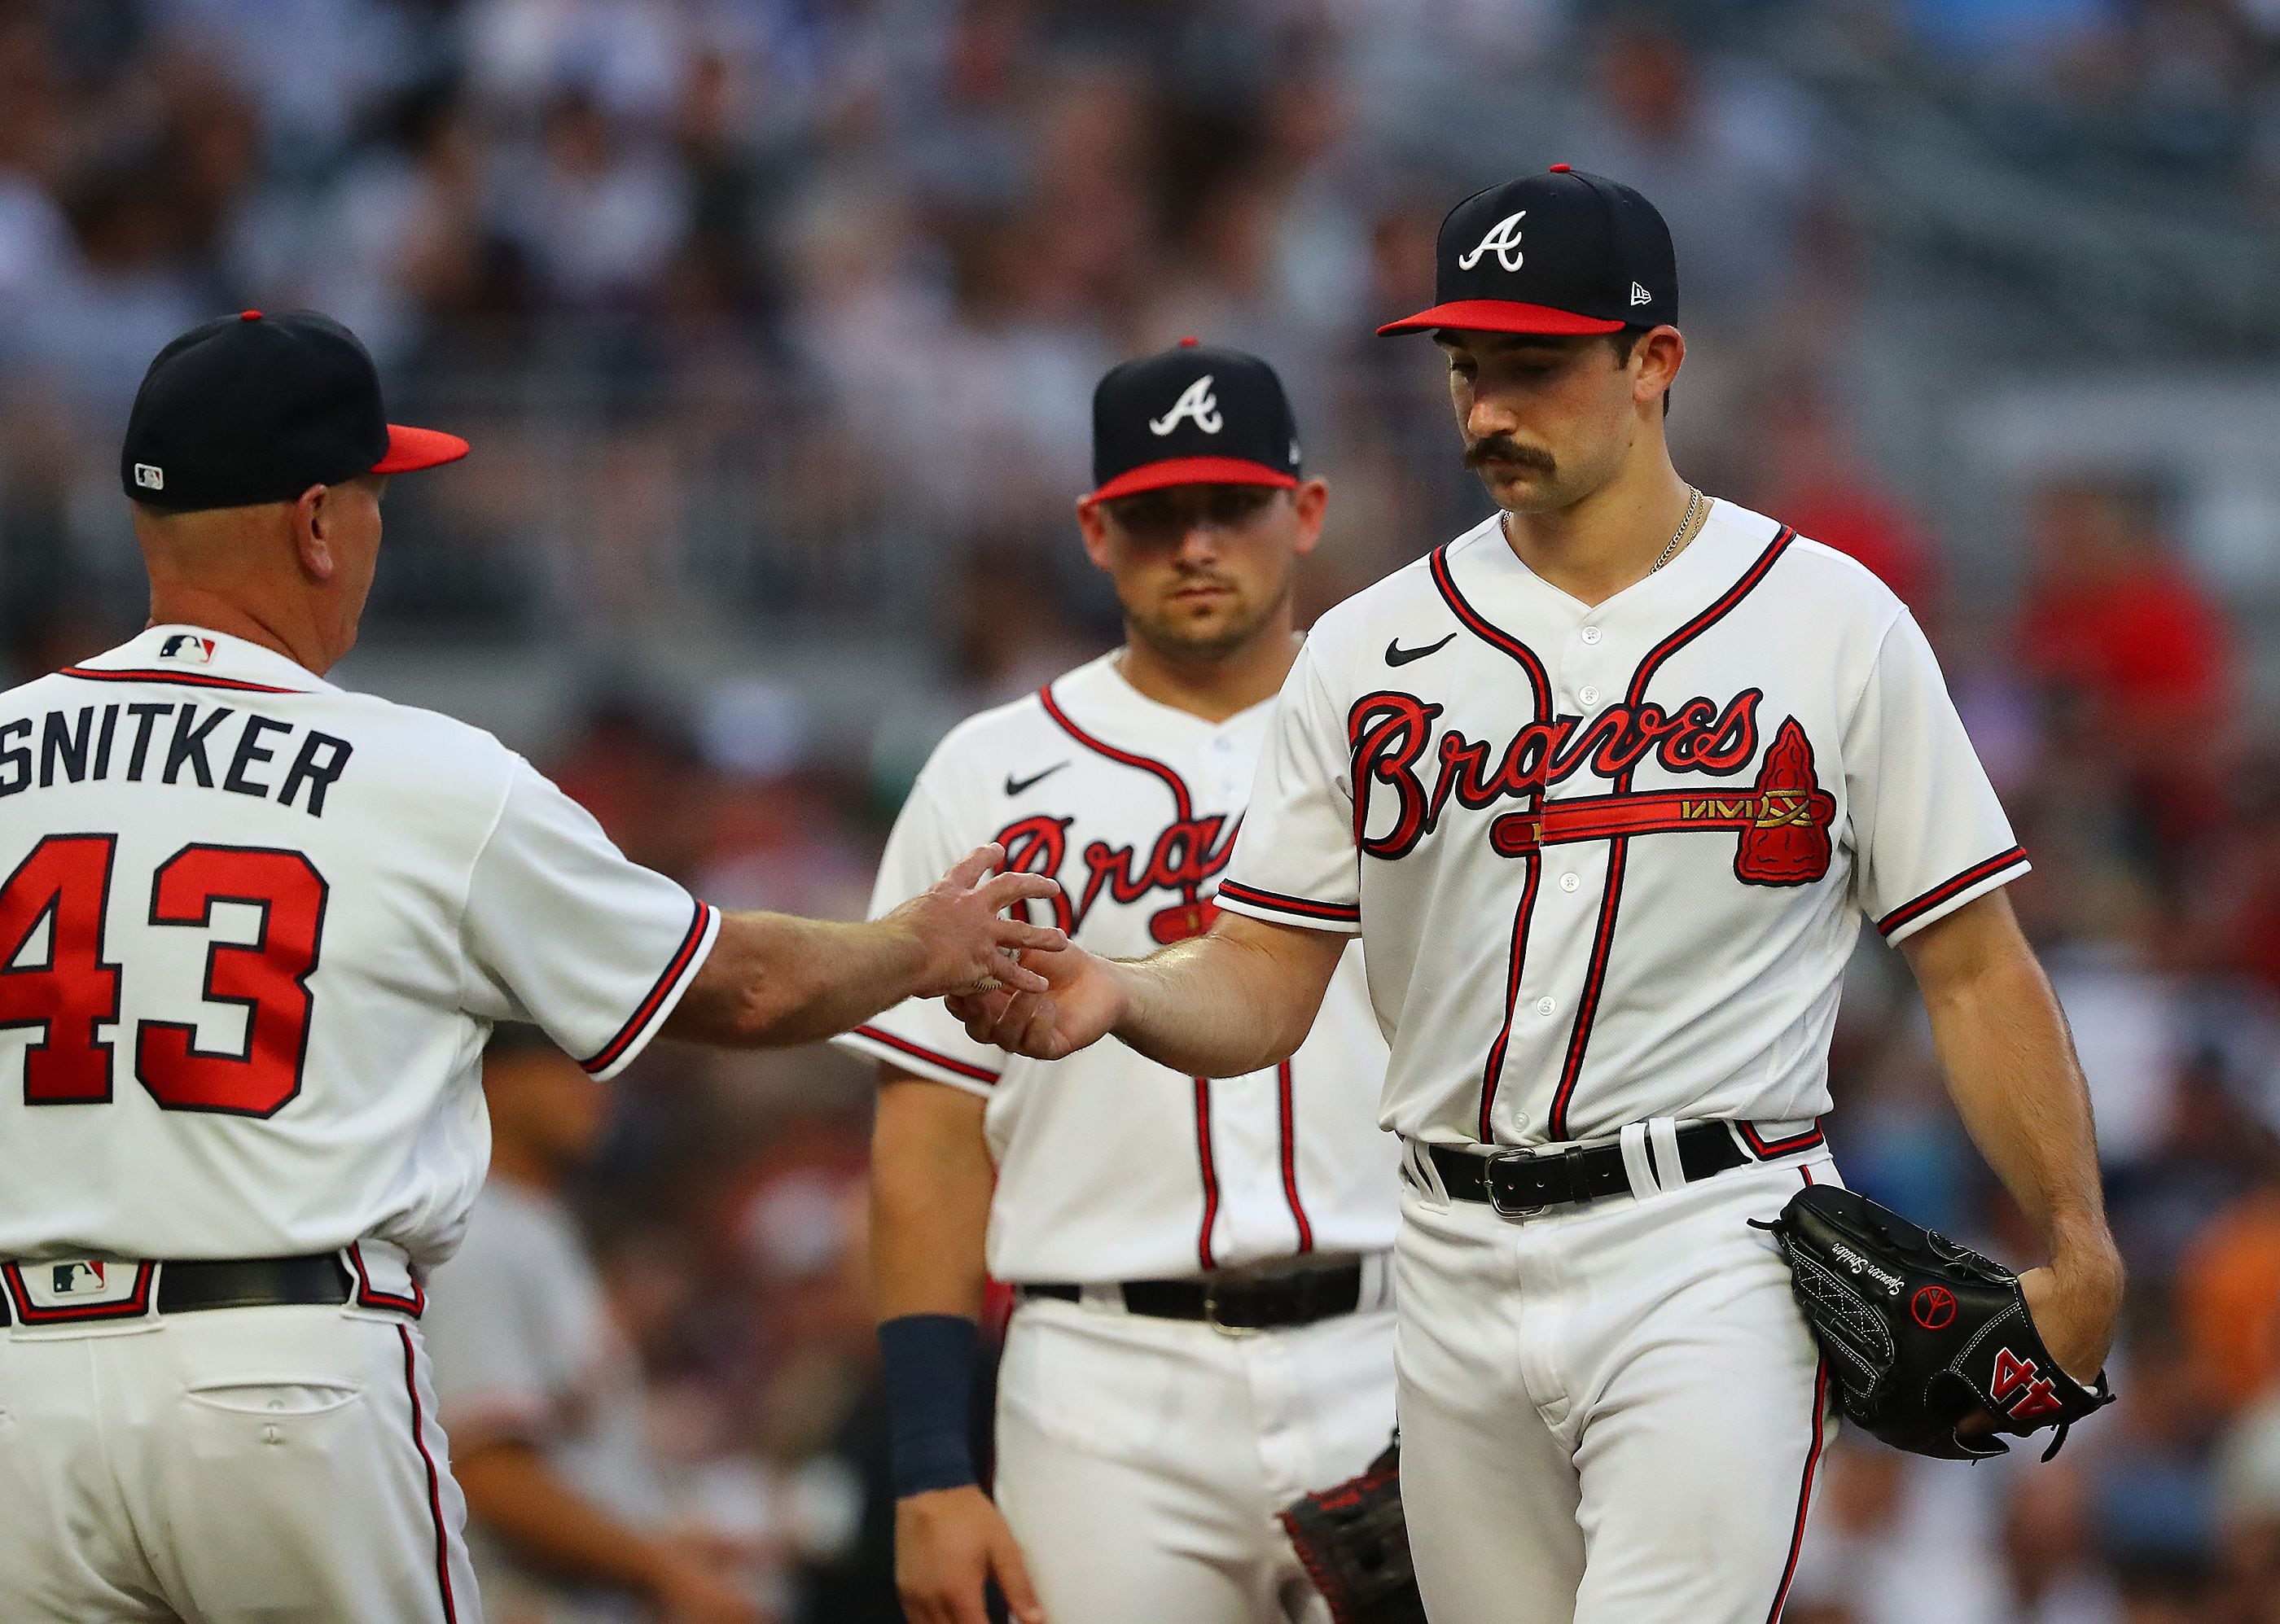 Photos: Pitching fails Braves in loss to Giants